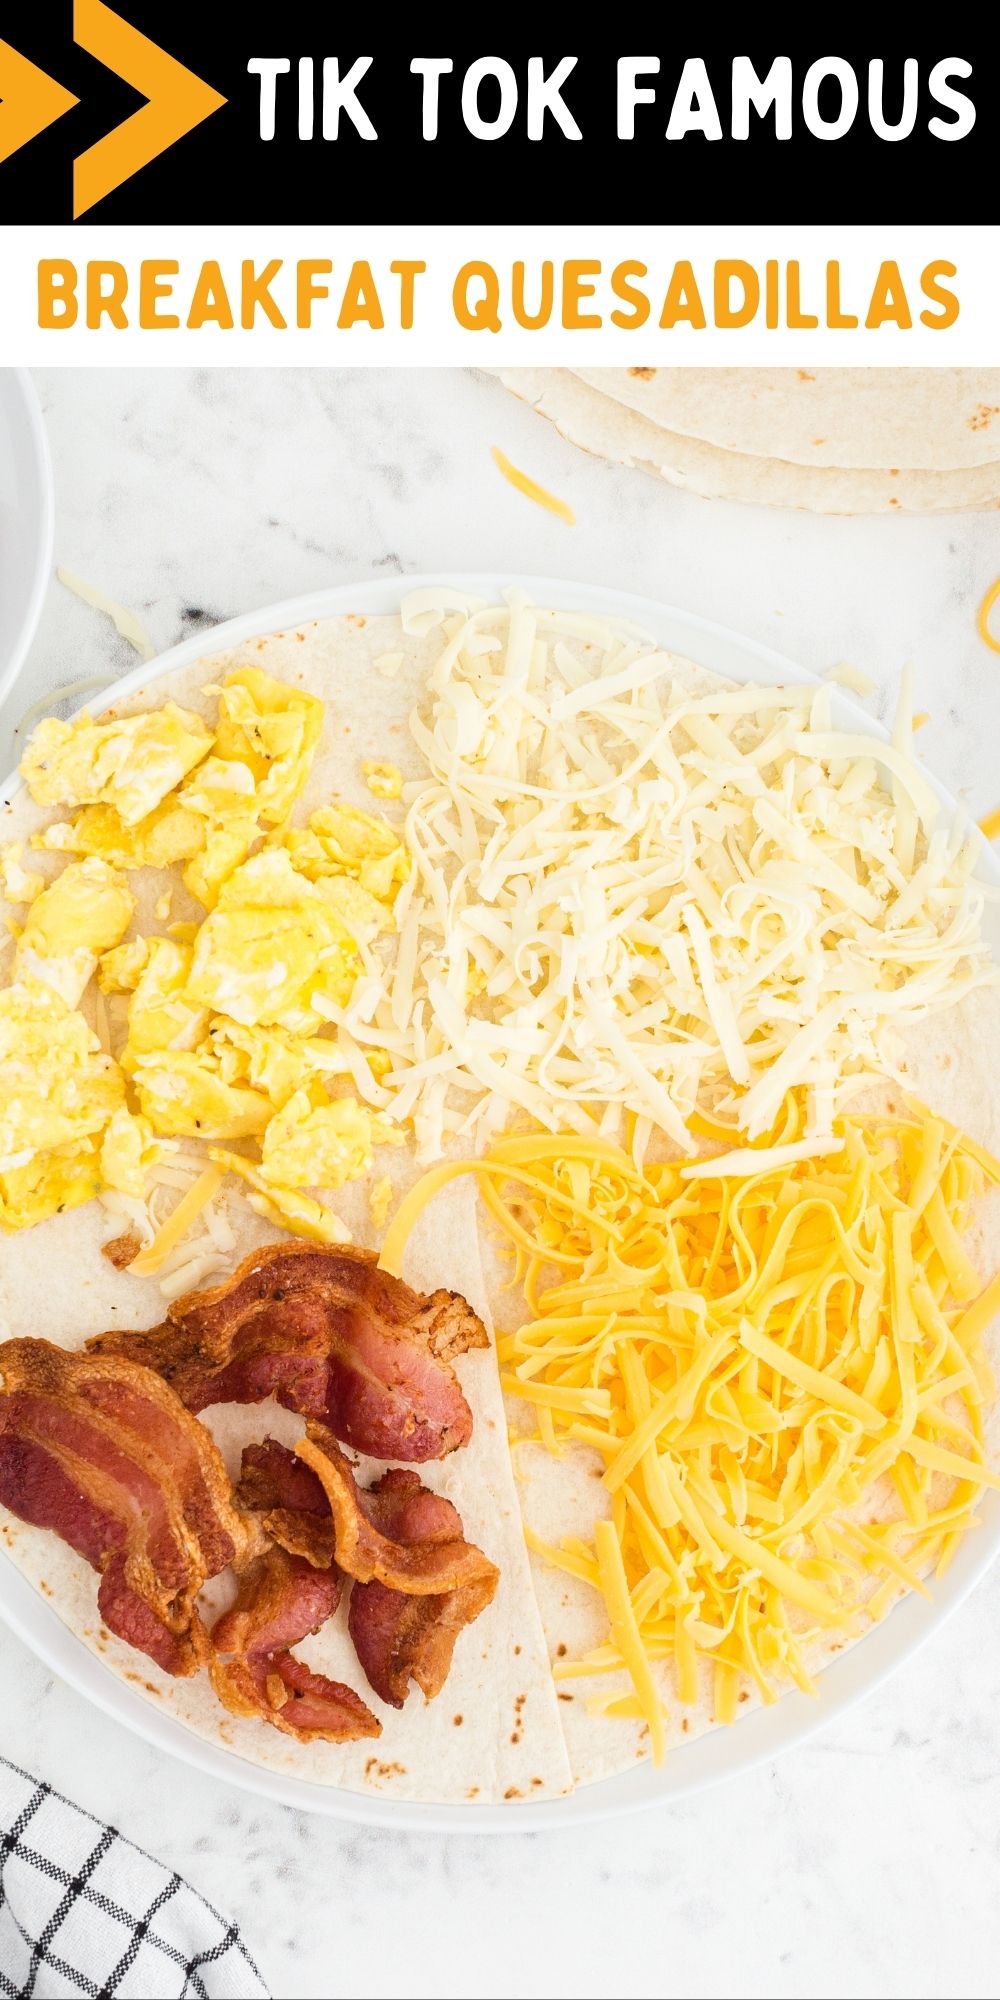 These Tik Tok Famous Breakfast Quesadillas have each quadrant of the tortilla filled with different breakfast goodies - eggs, bacon, & cheese. via @familyfresh